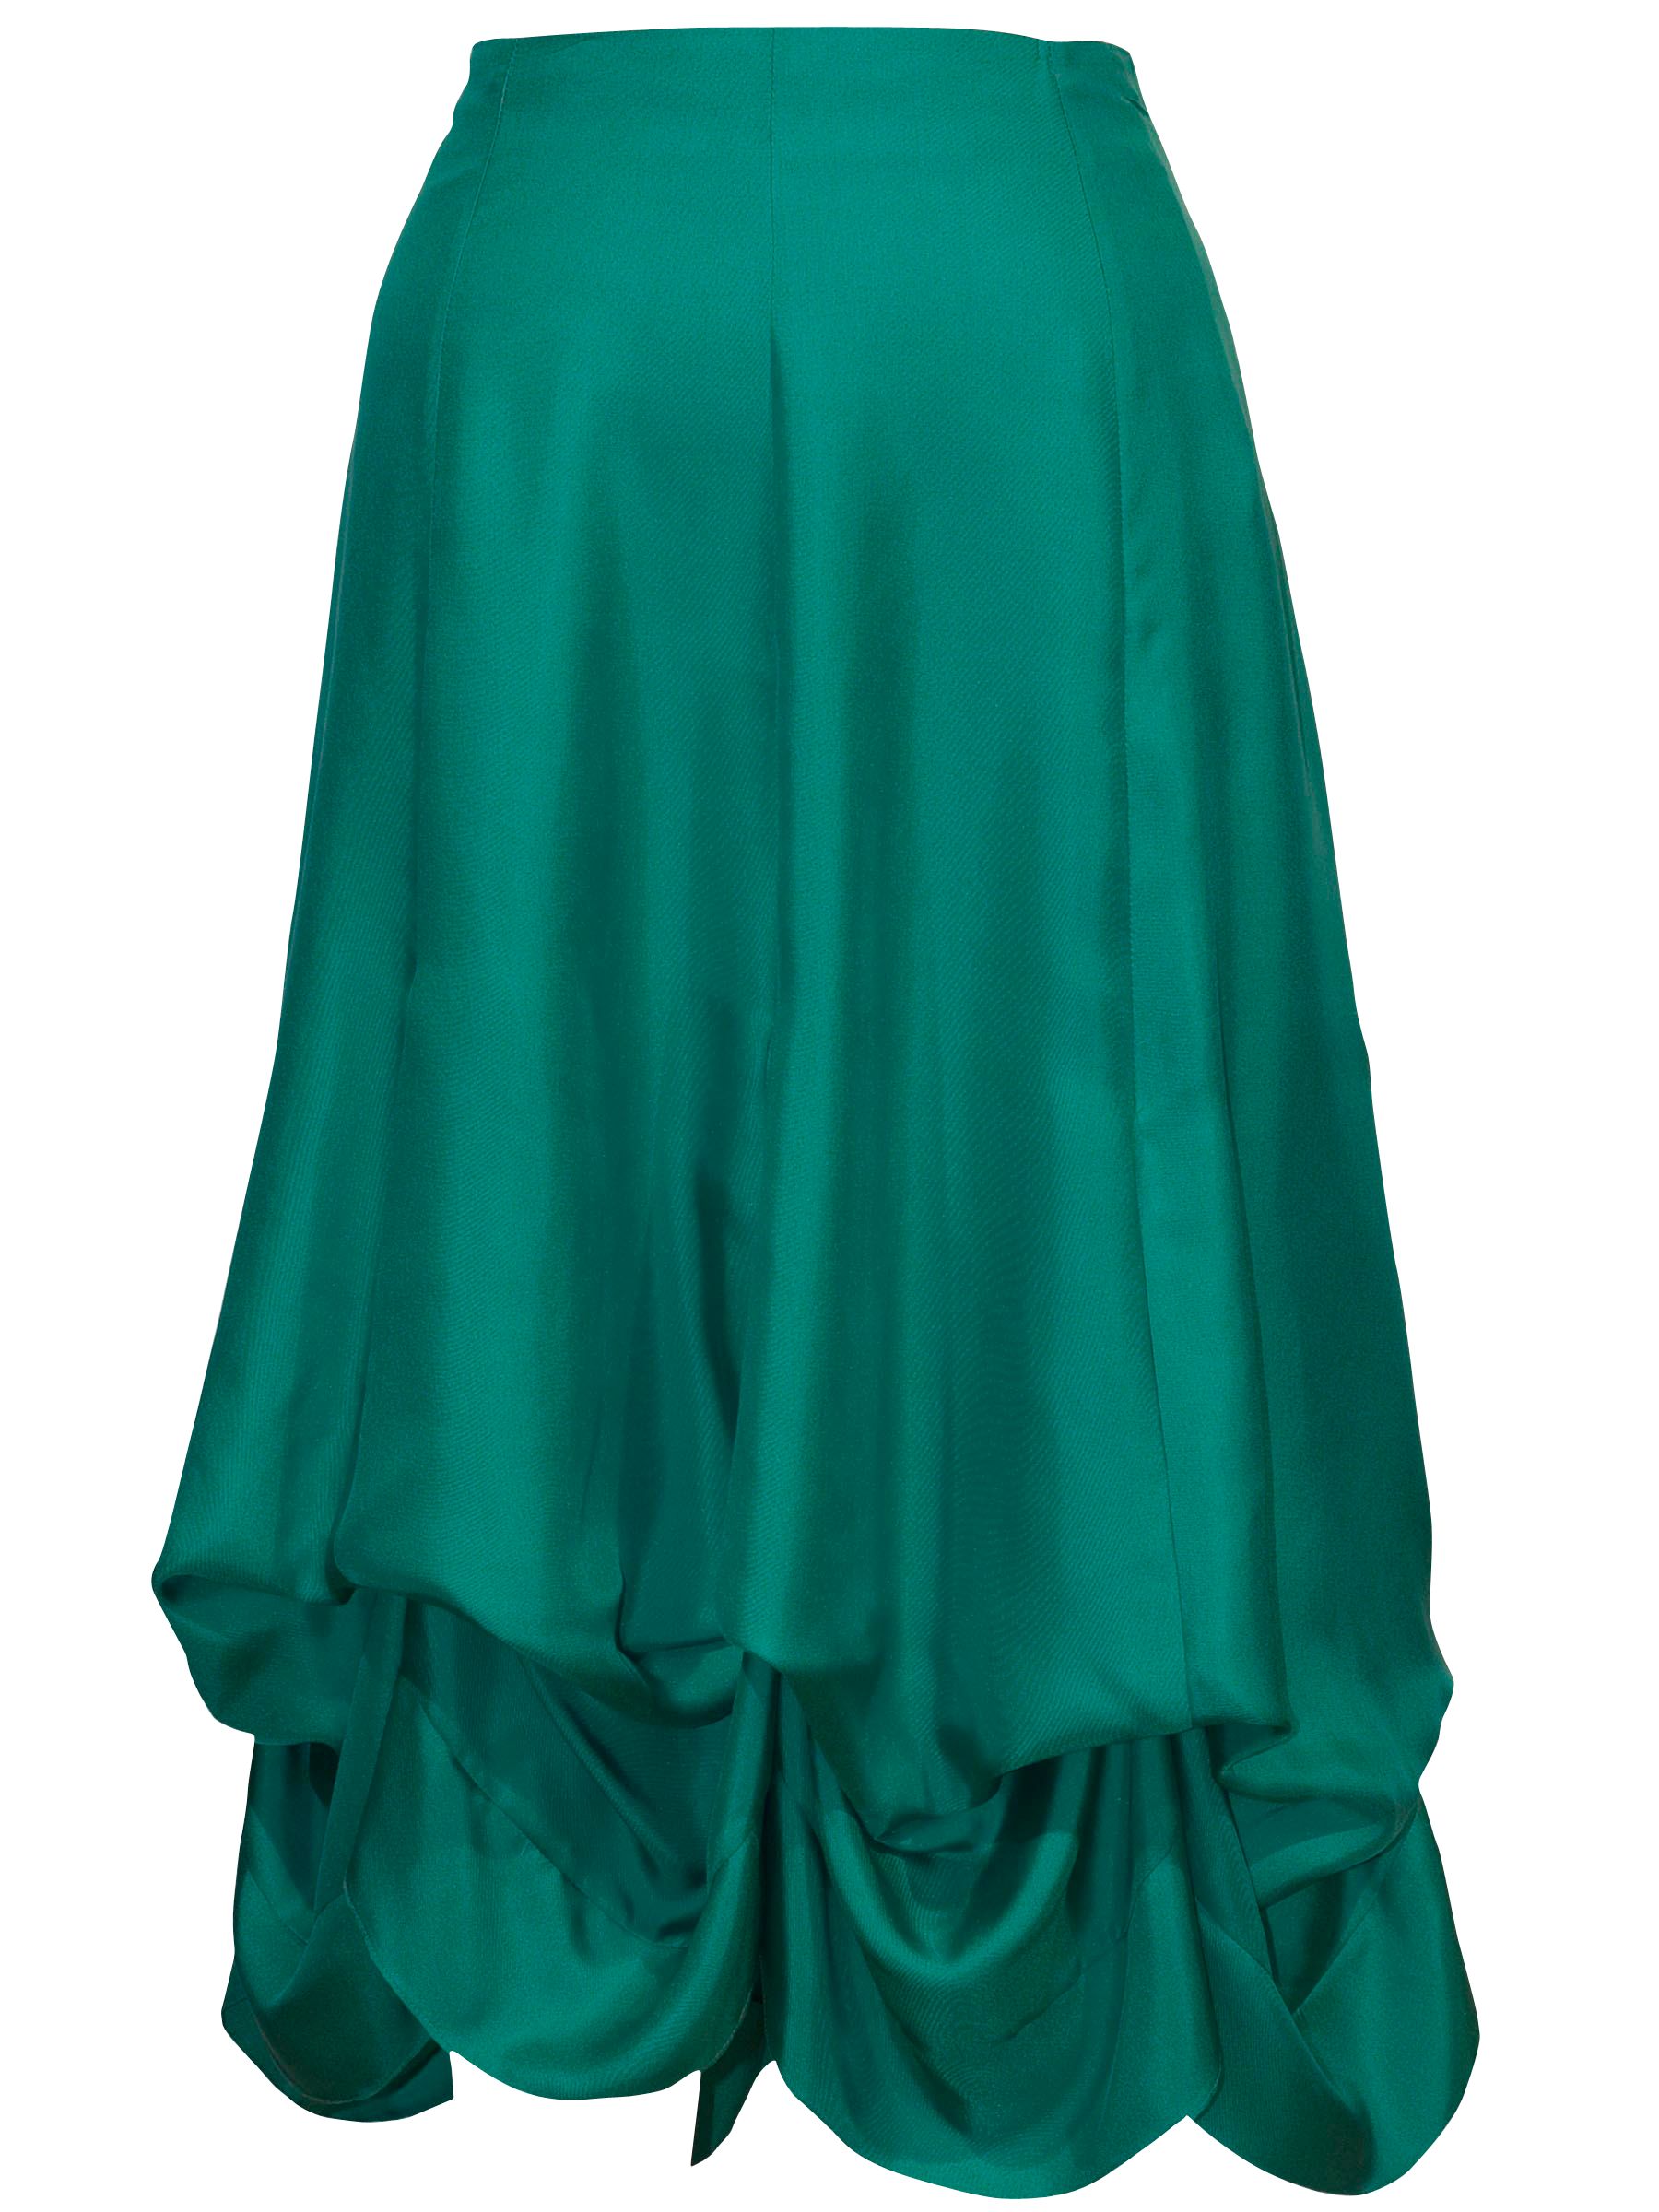 Chesca Now by Chesca Tie Up Skirt, Jade at JohnLewis